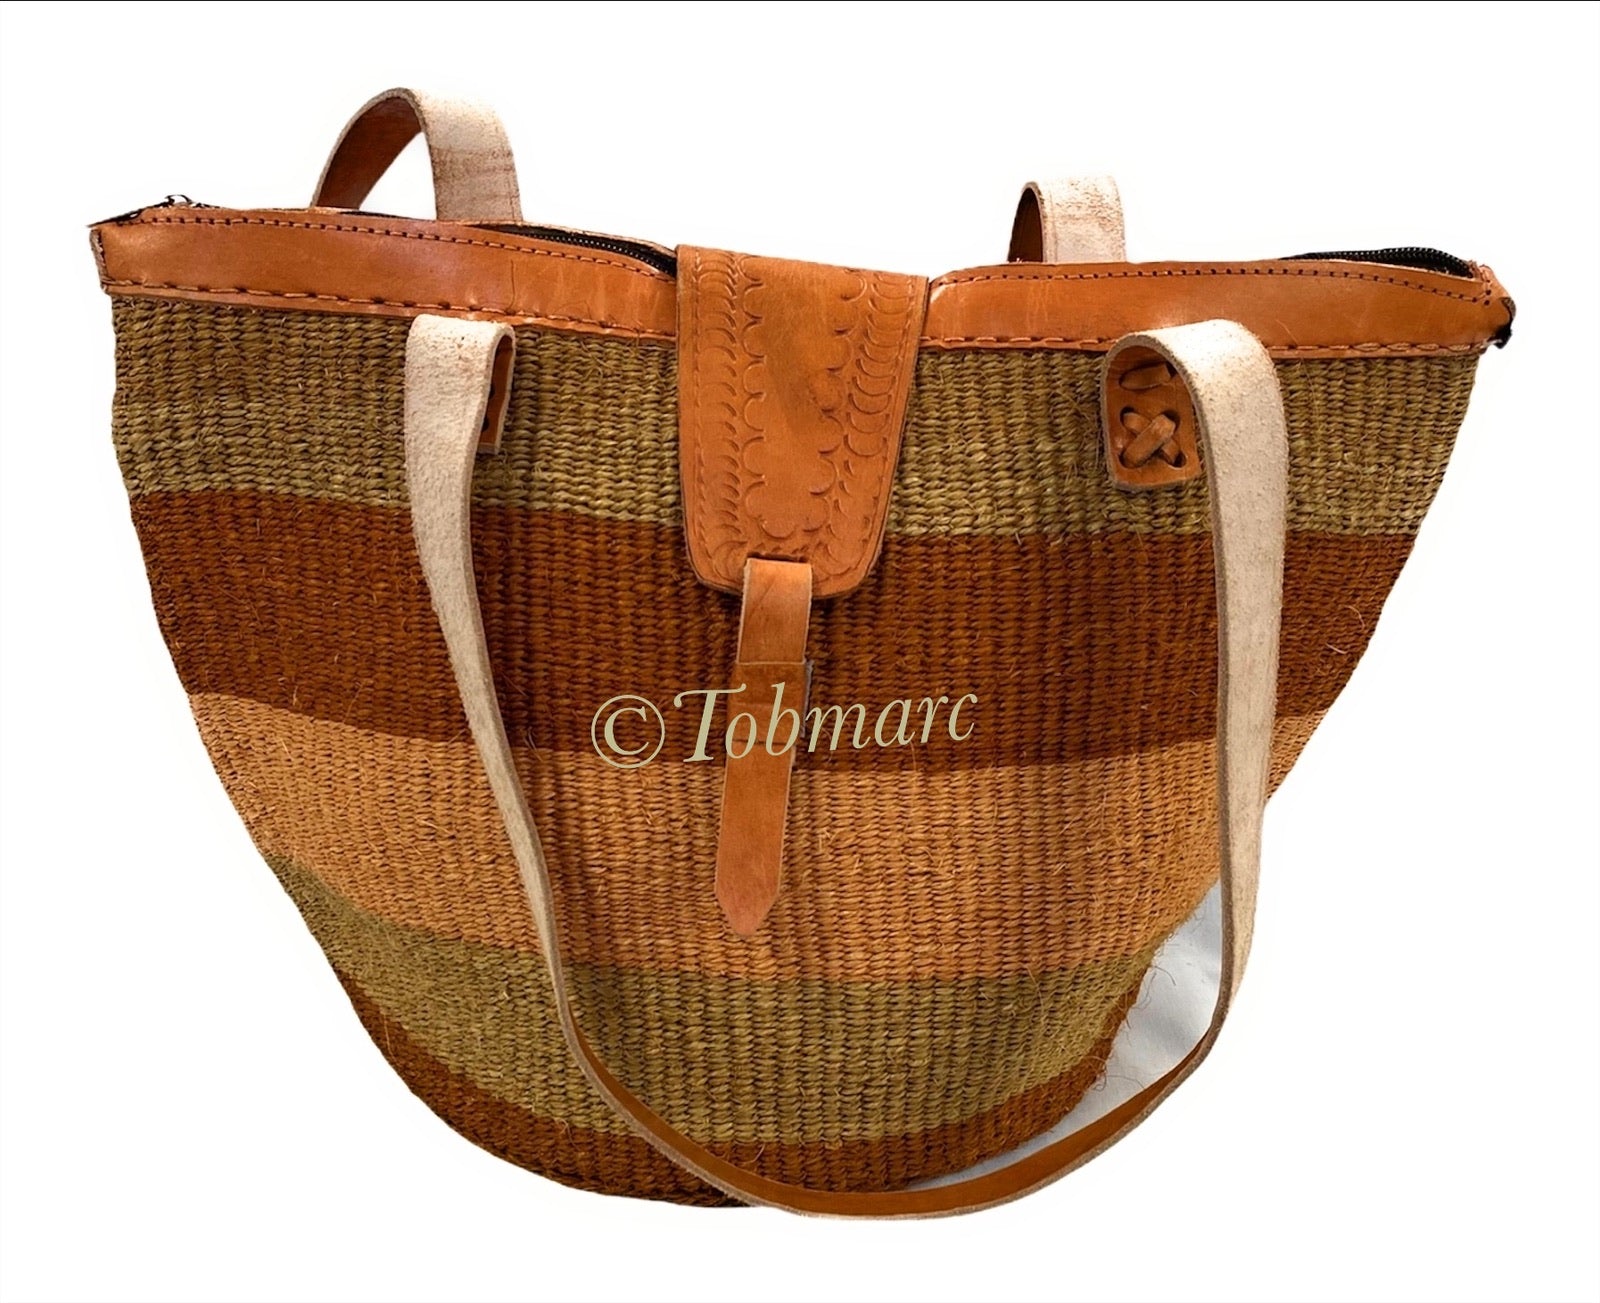 Assorted Shopping Baskets, Beach Baskets, Bags With Leather Handle, African Kiondo - Tobmarc Home Decor & Gifts 